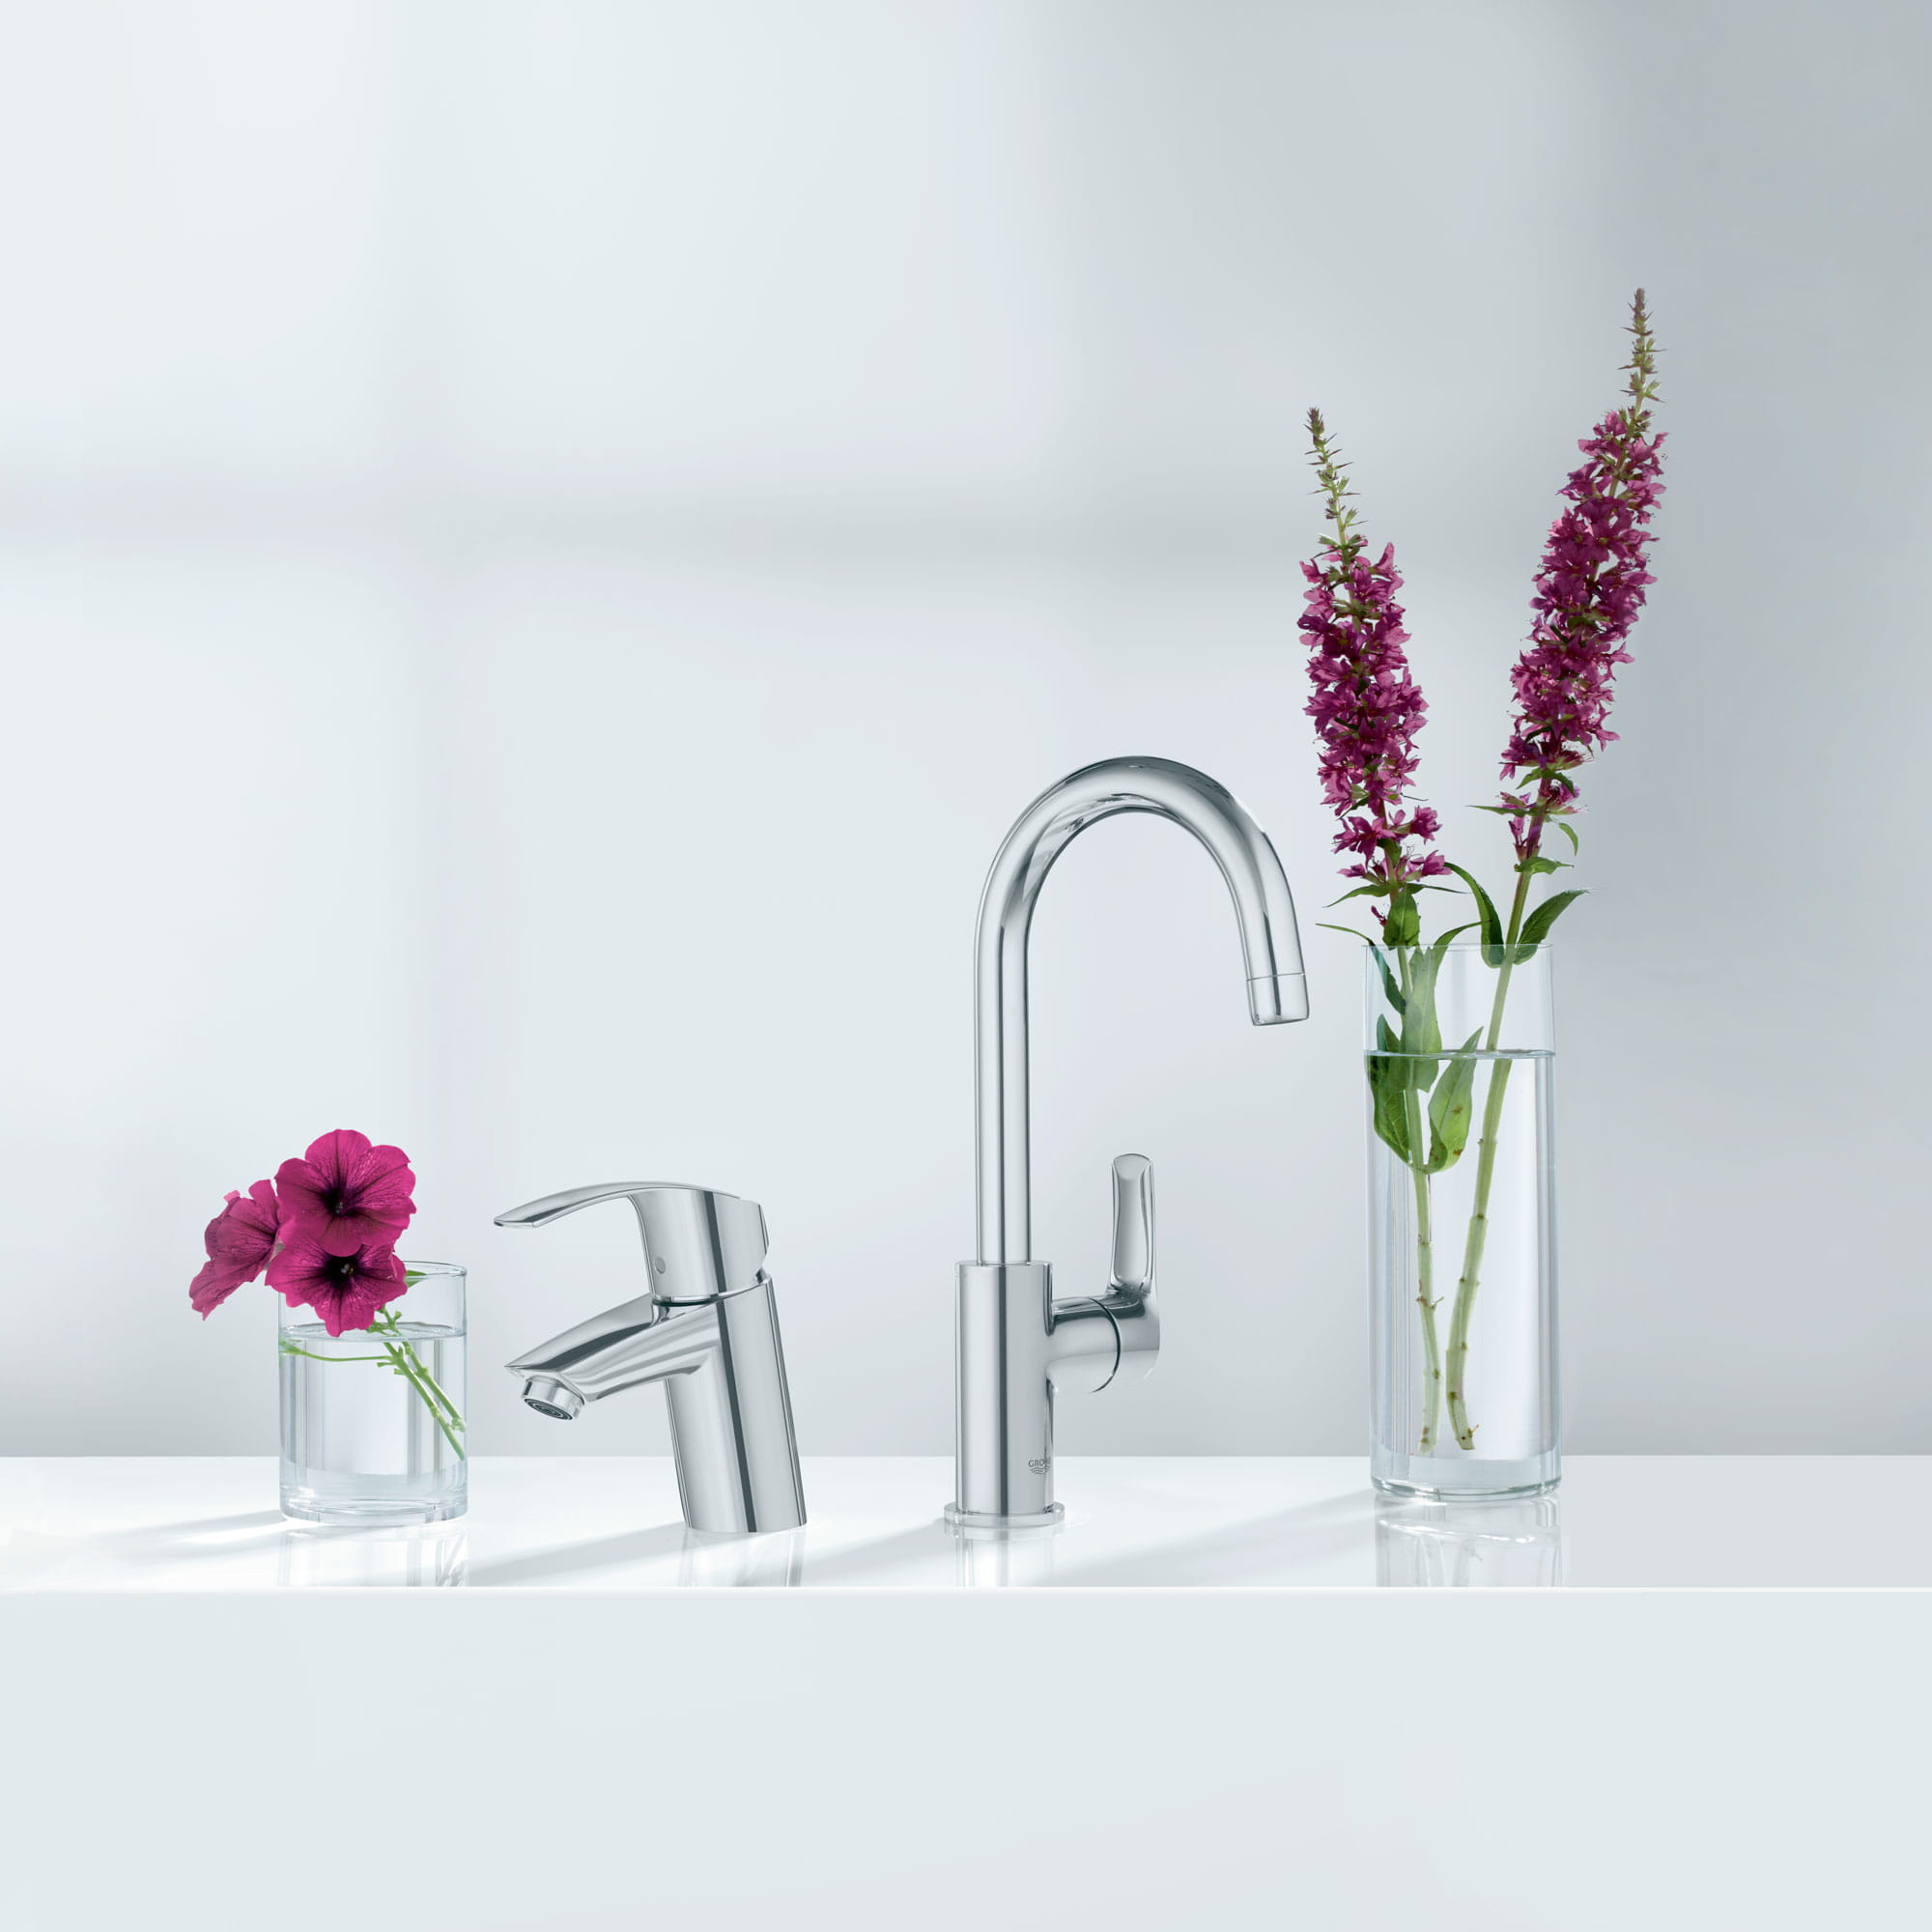 A pair of Grohe faucets next to vases filled with flowers.